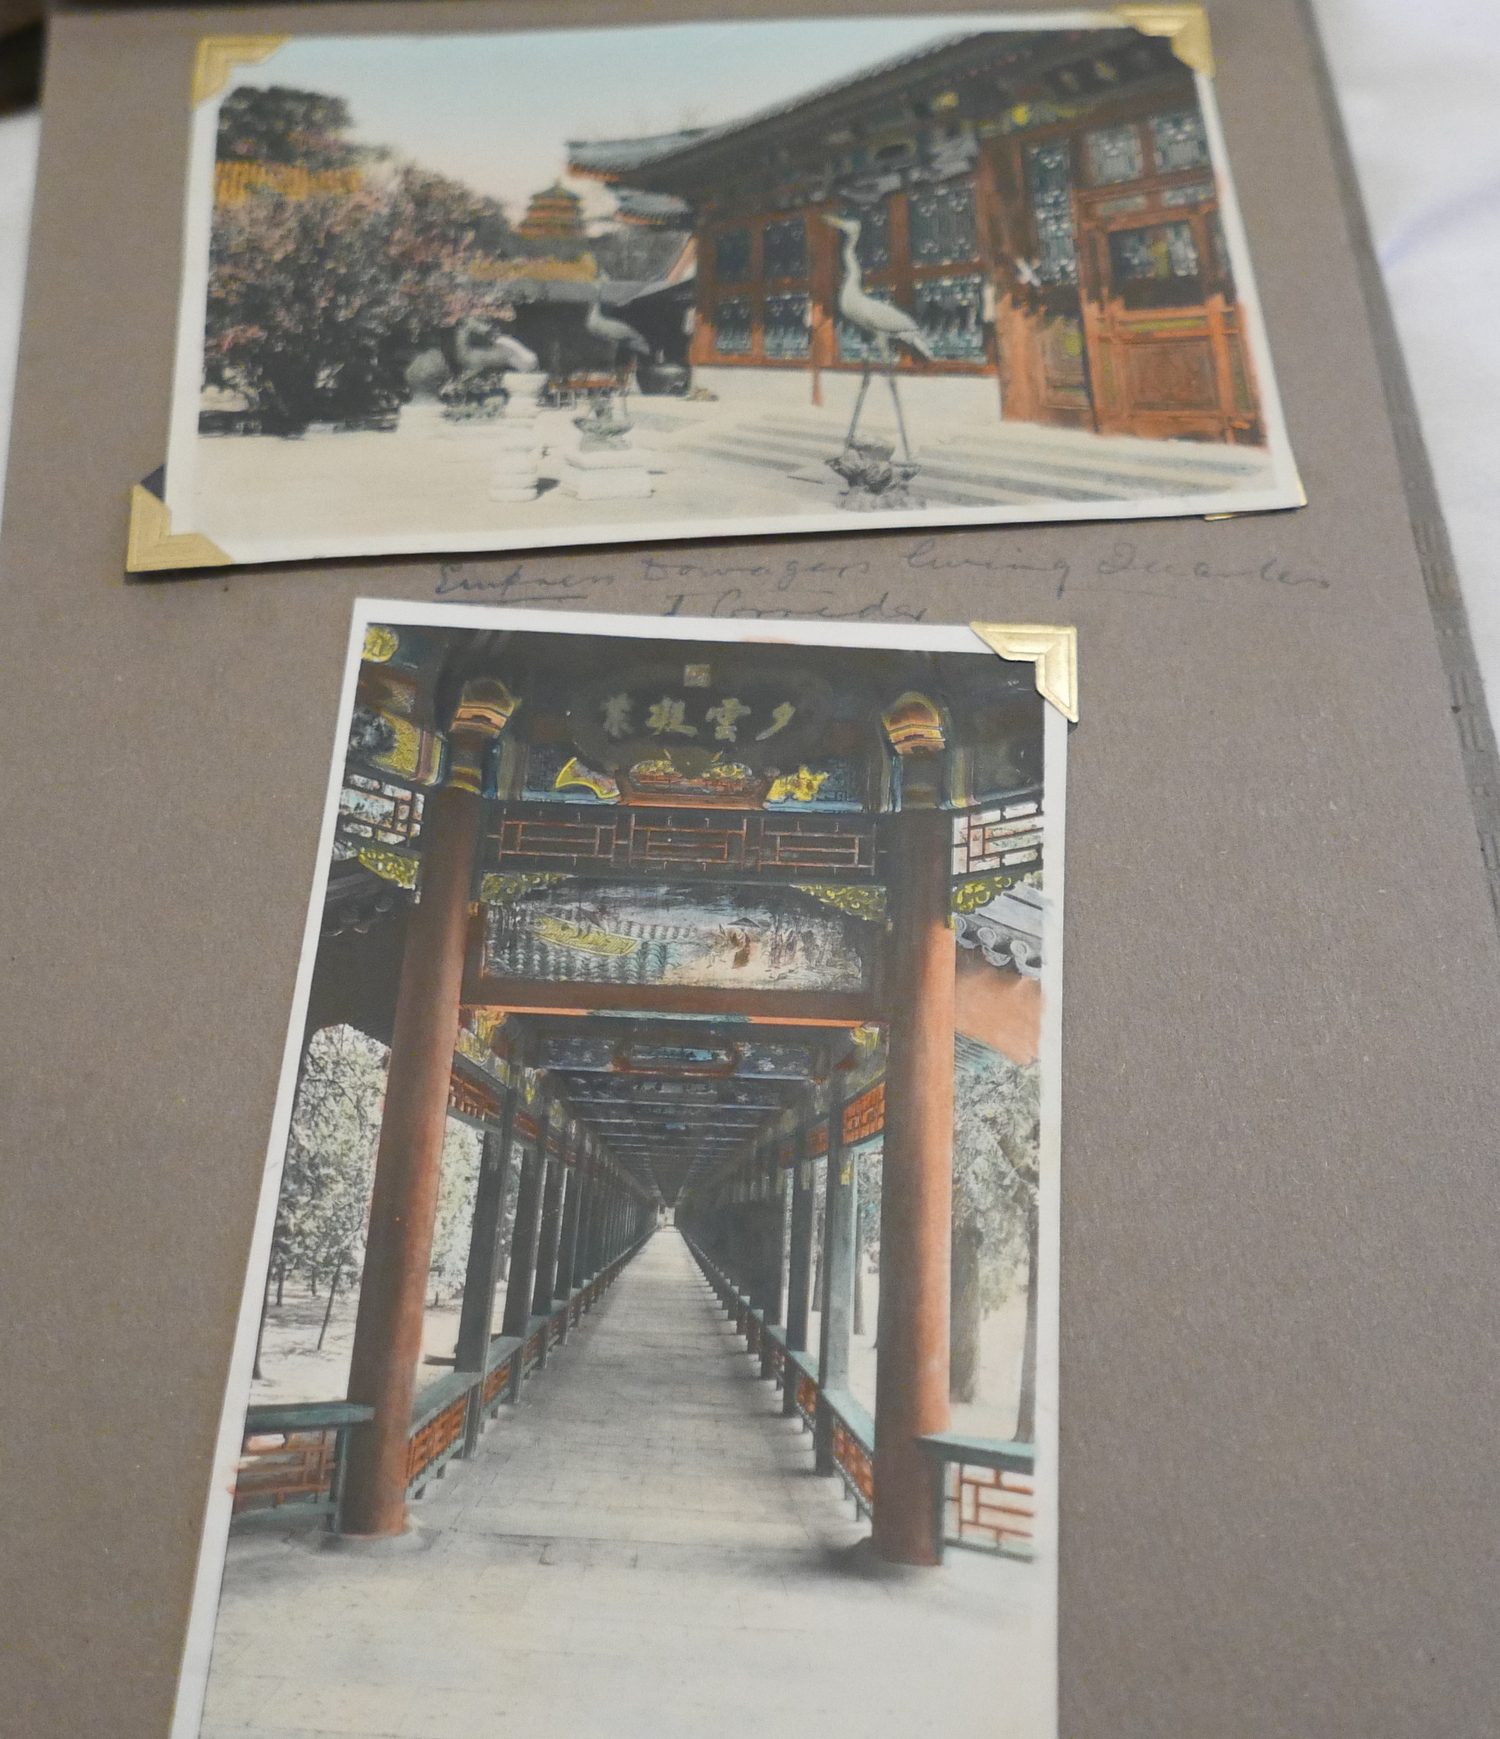 Album of 24 Photographs of the Summer Palace Bejing c1930 by Mei Li Photographer - Image 6 of 13